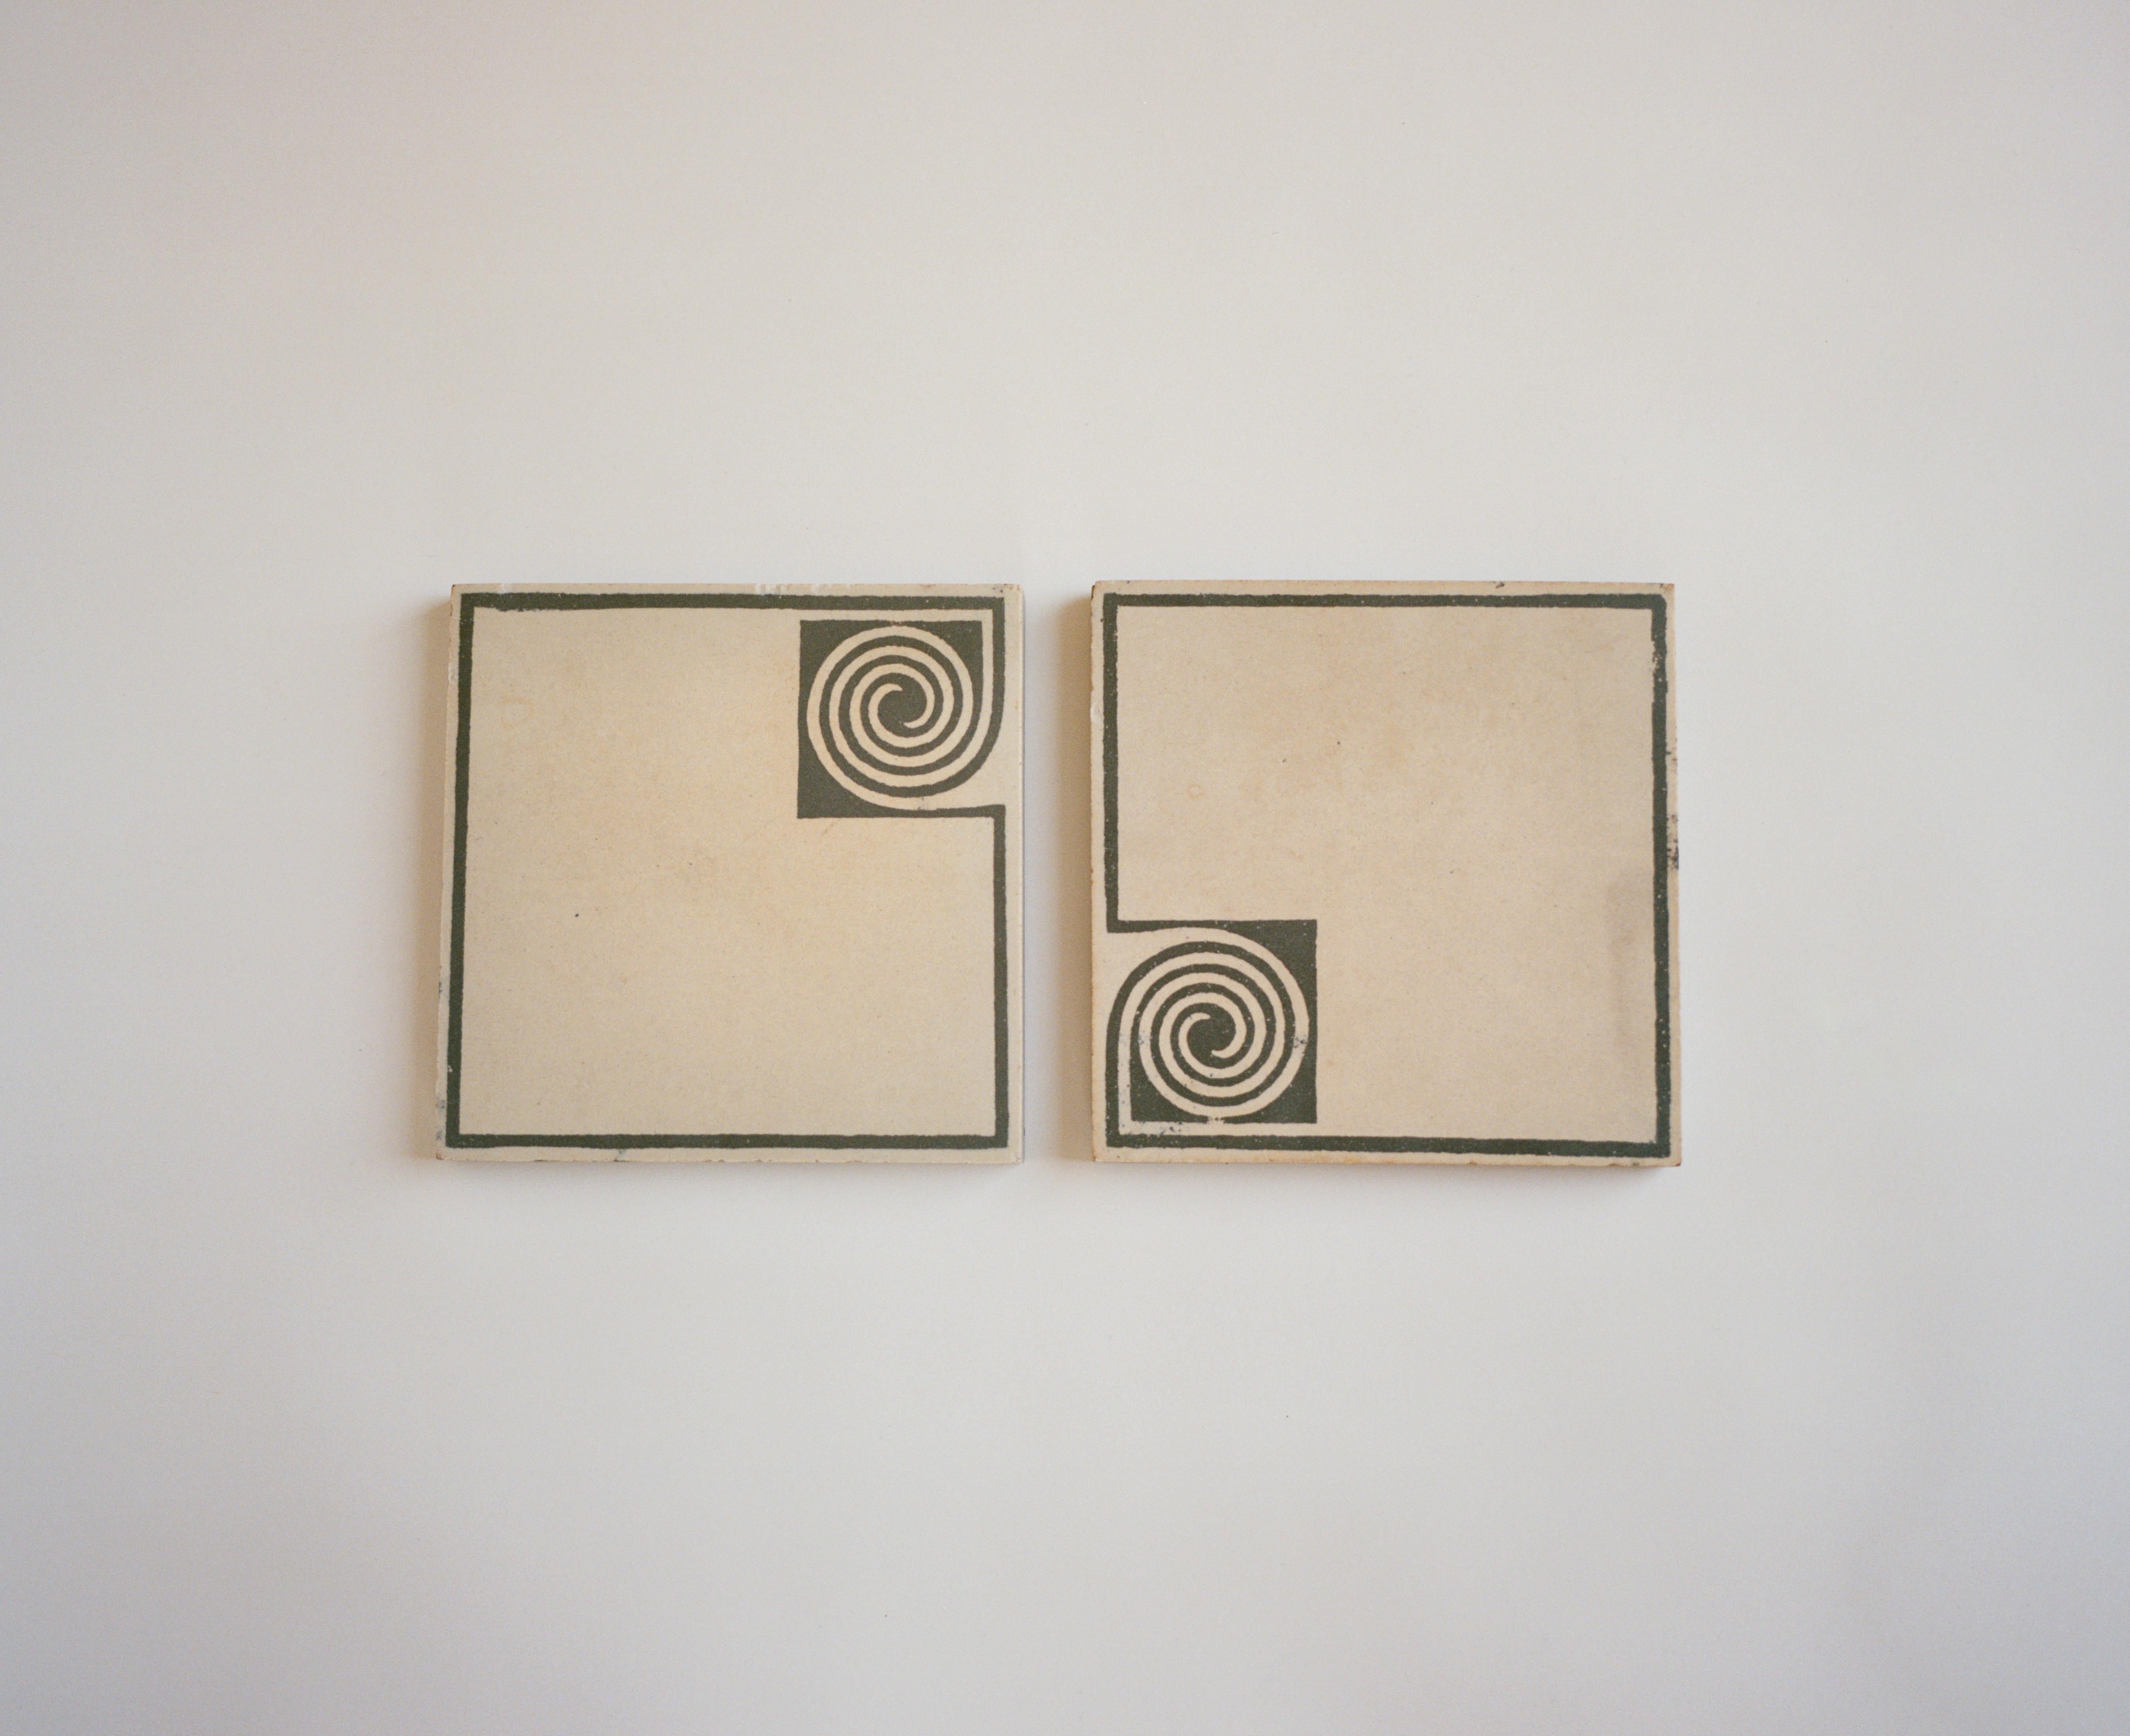 A pair of stoneware tiles designed by Peter Behrens for Villeroy & Boch, circa 1903, produced in Mettlach, Germany exhibiting Behrens clean, modernist aesthetic and departure from Art Nouveau. Peter Behrens (1868-1940) was an architect and